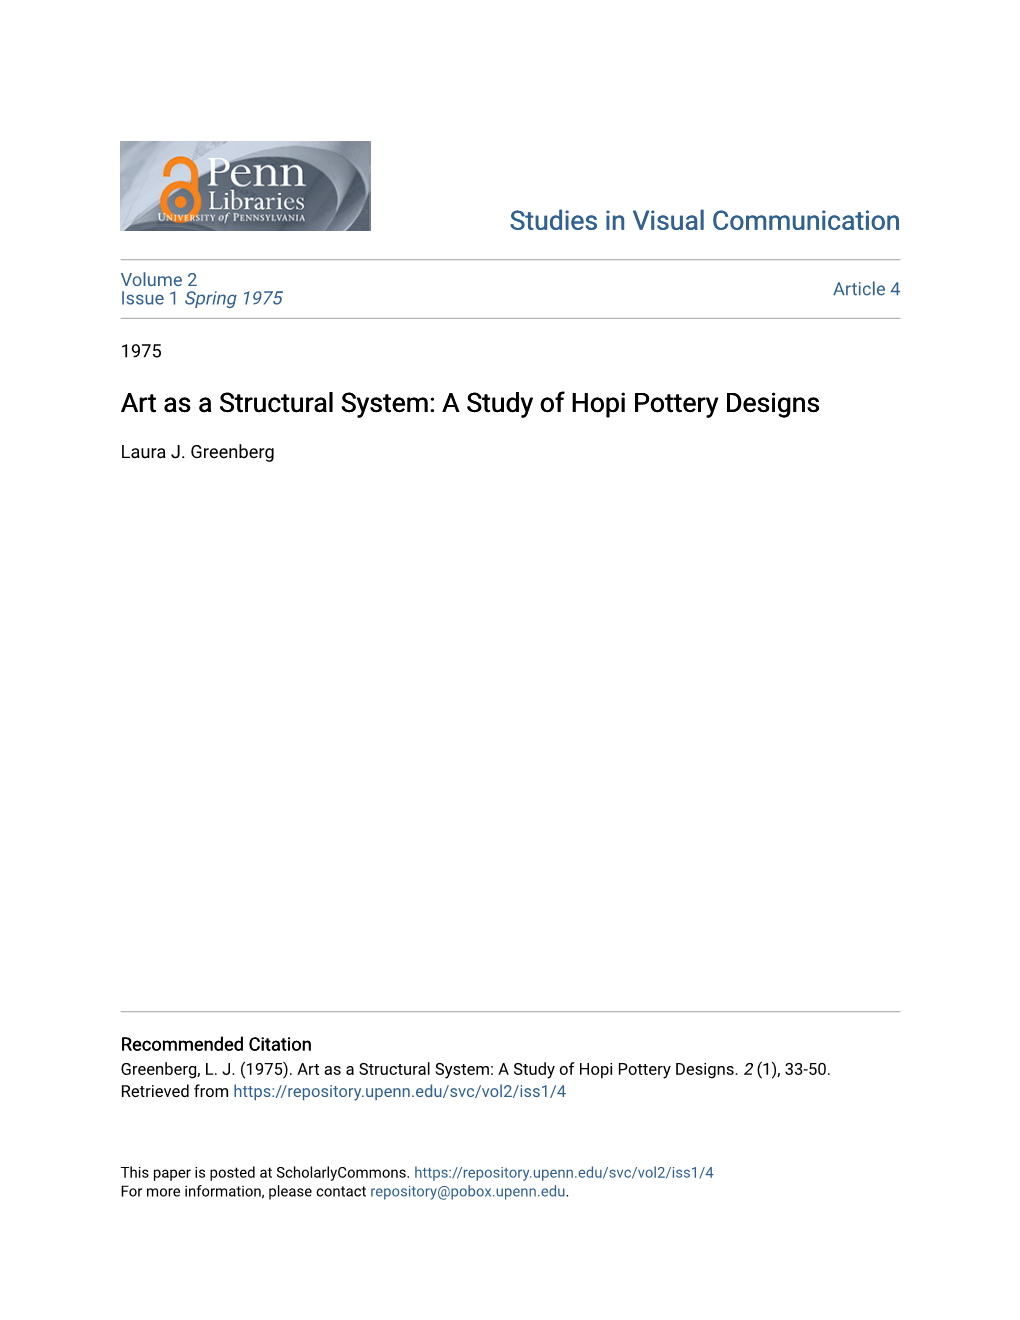 Art As a Structural System: a Study of Hopi Pottery Designs